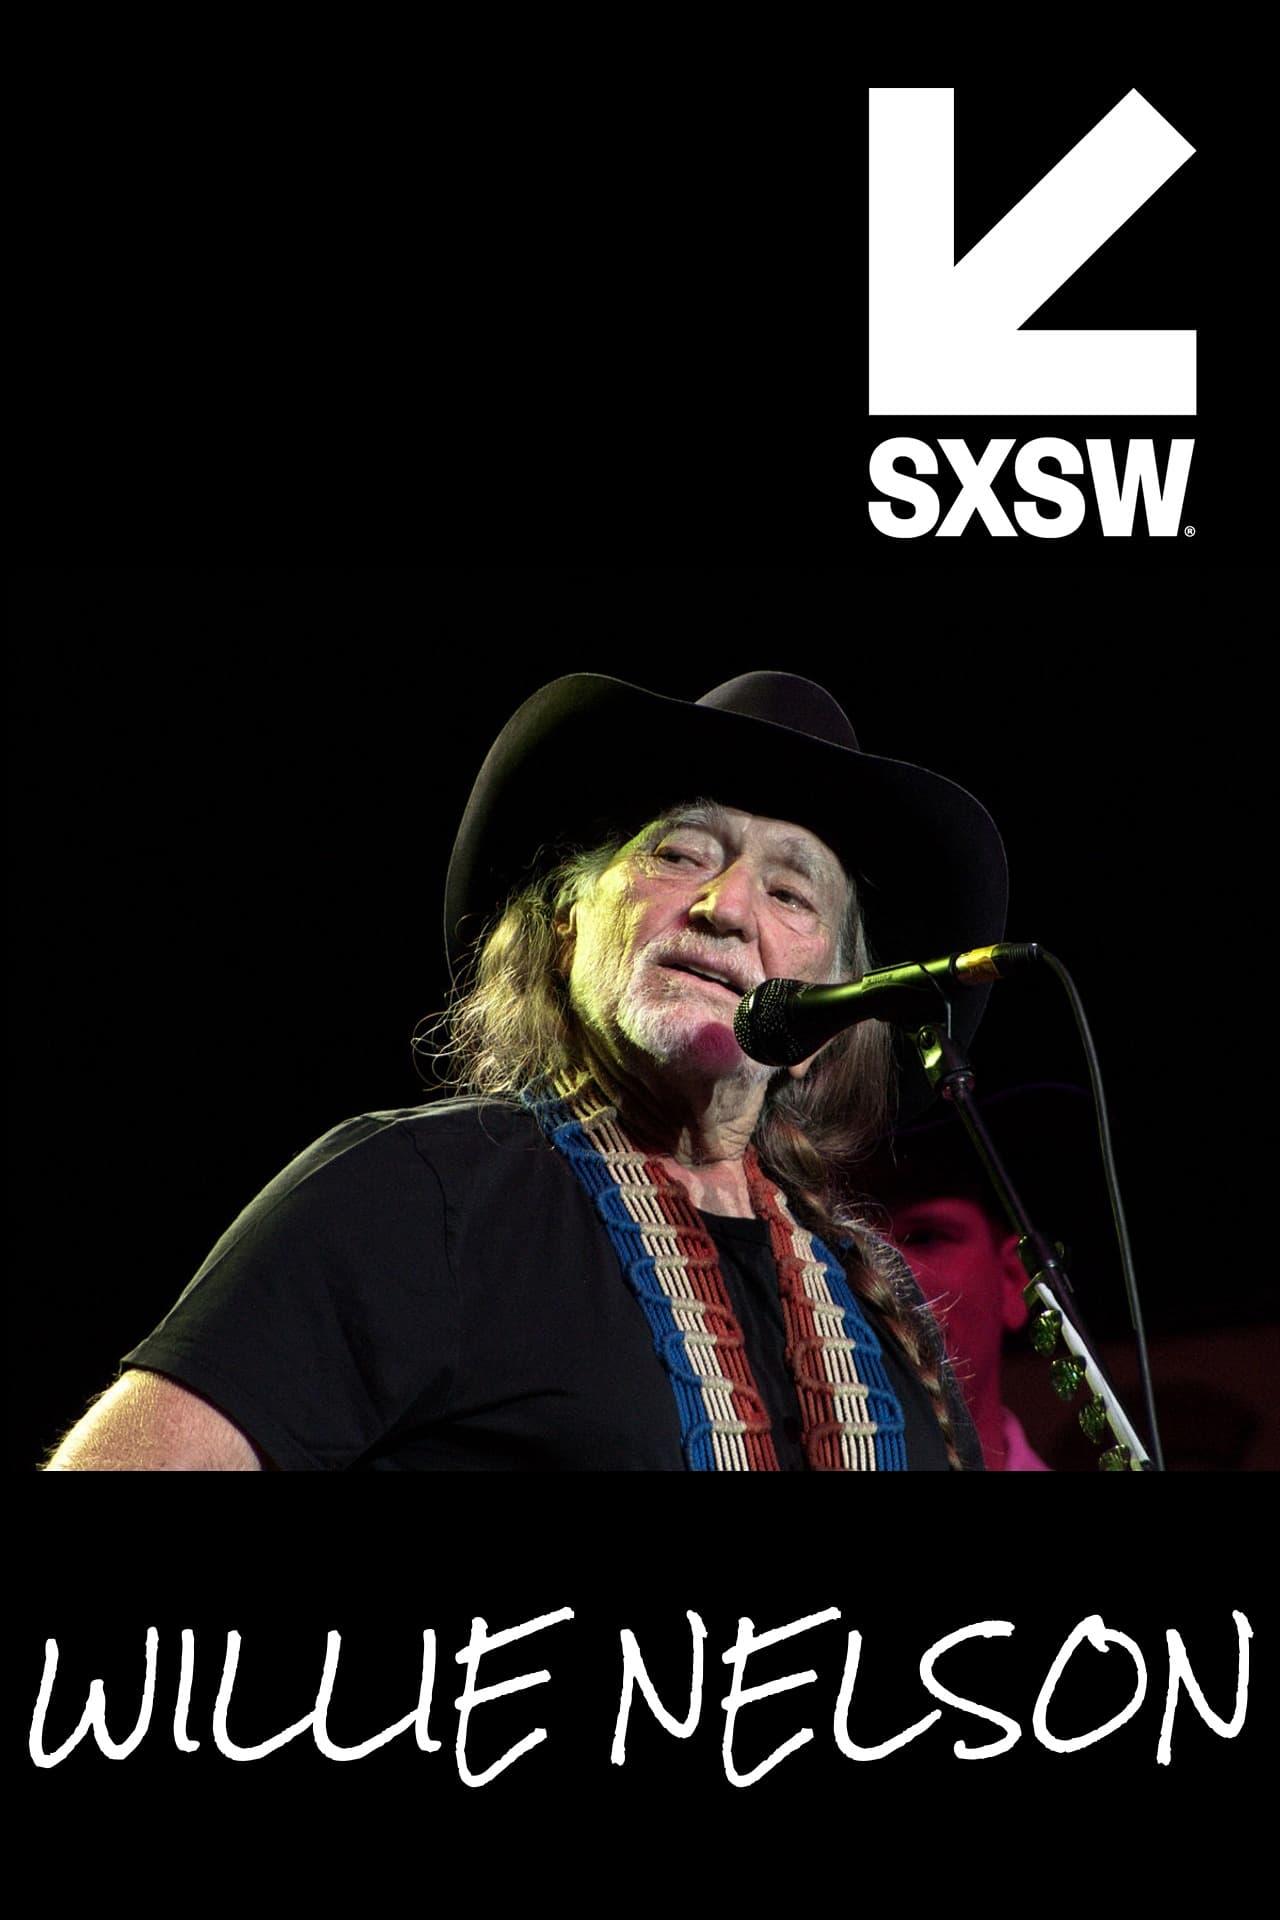 Willie Nelson Live @ SXSW poster